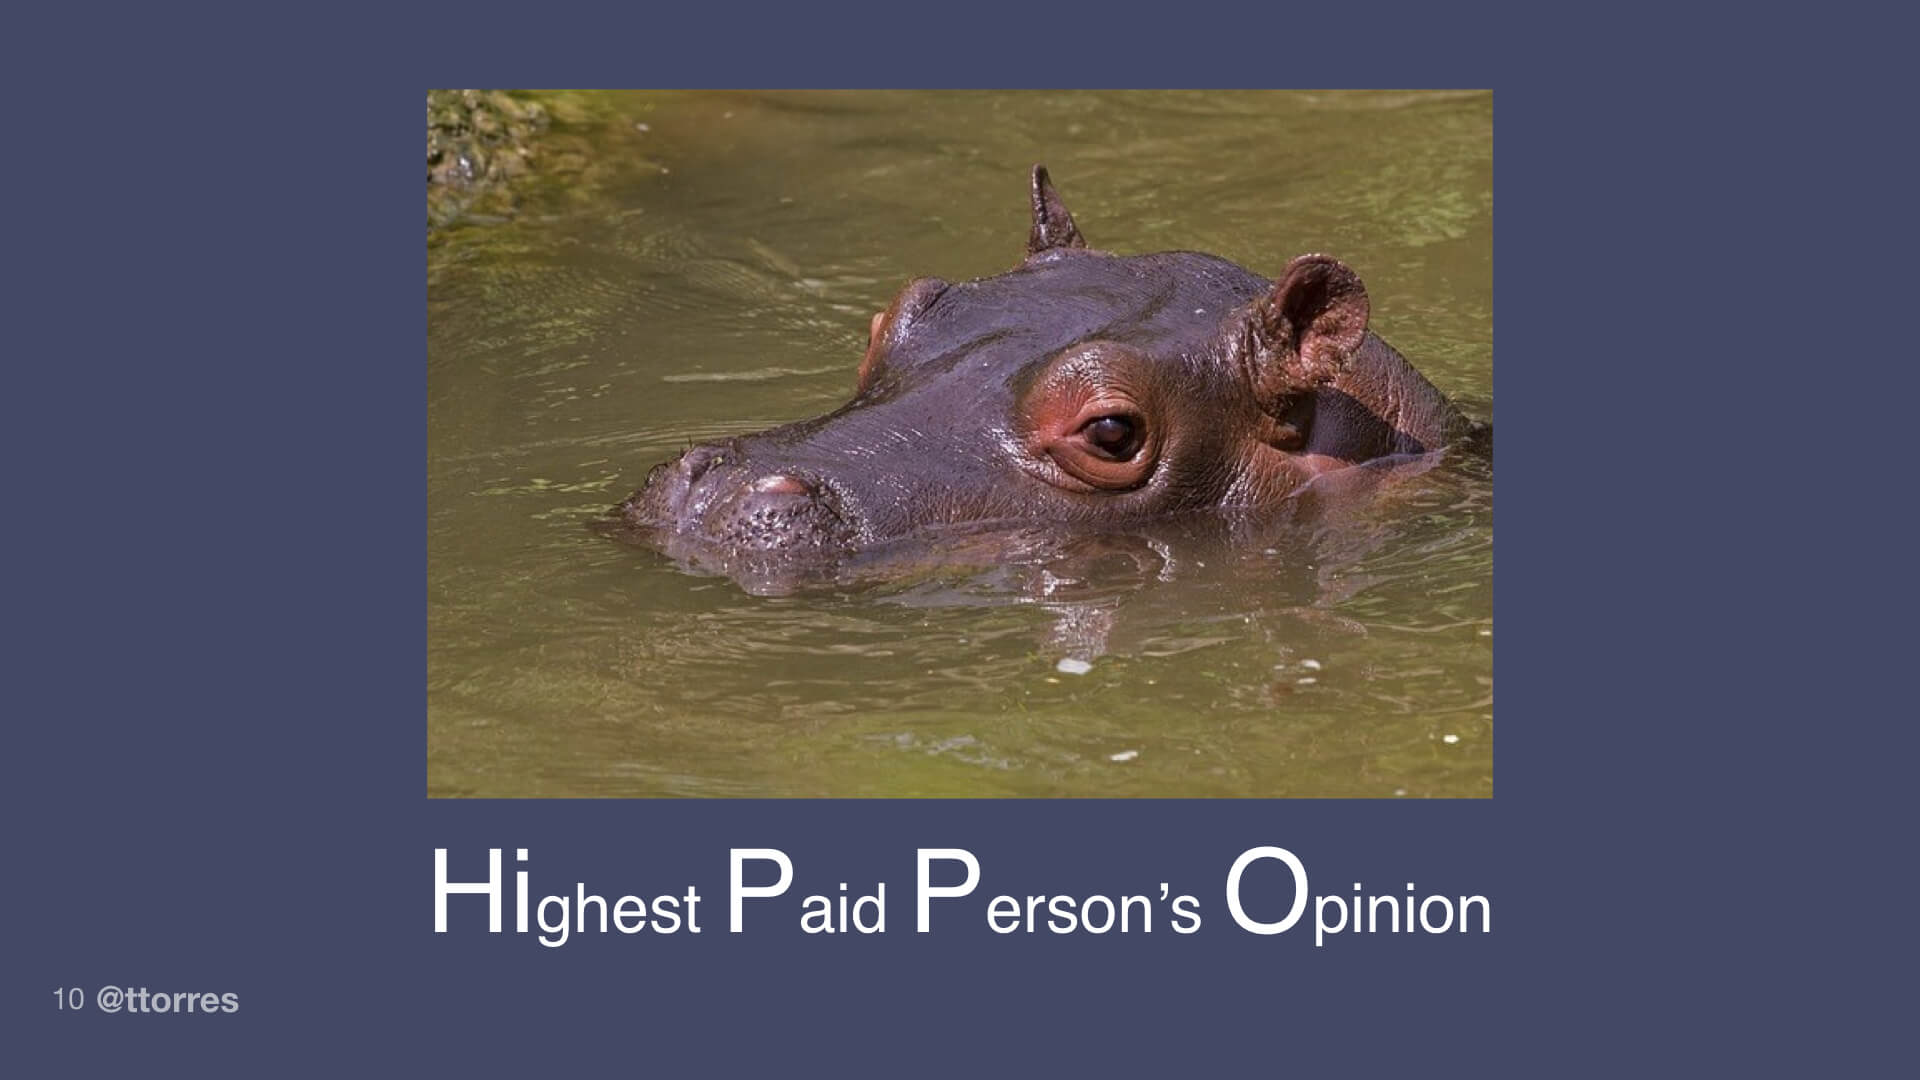 A photograph of a hippo with the text "Highest Paid Person's Opinion" below it.